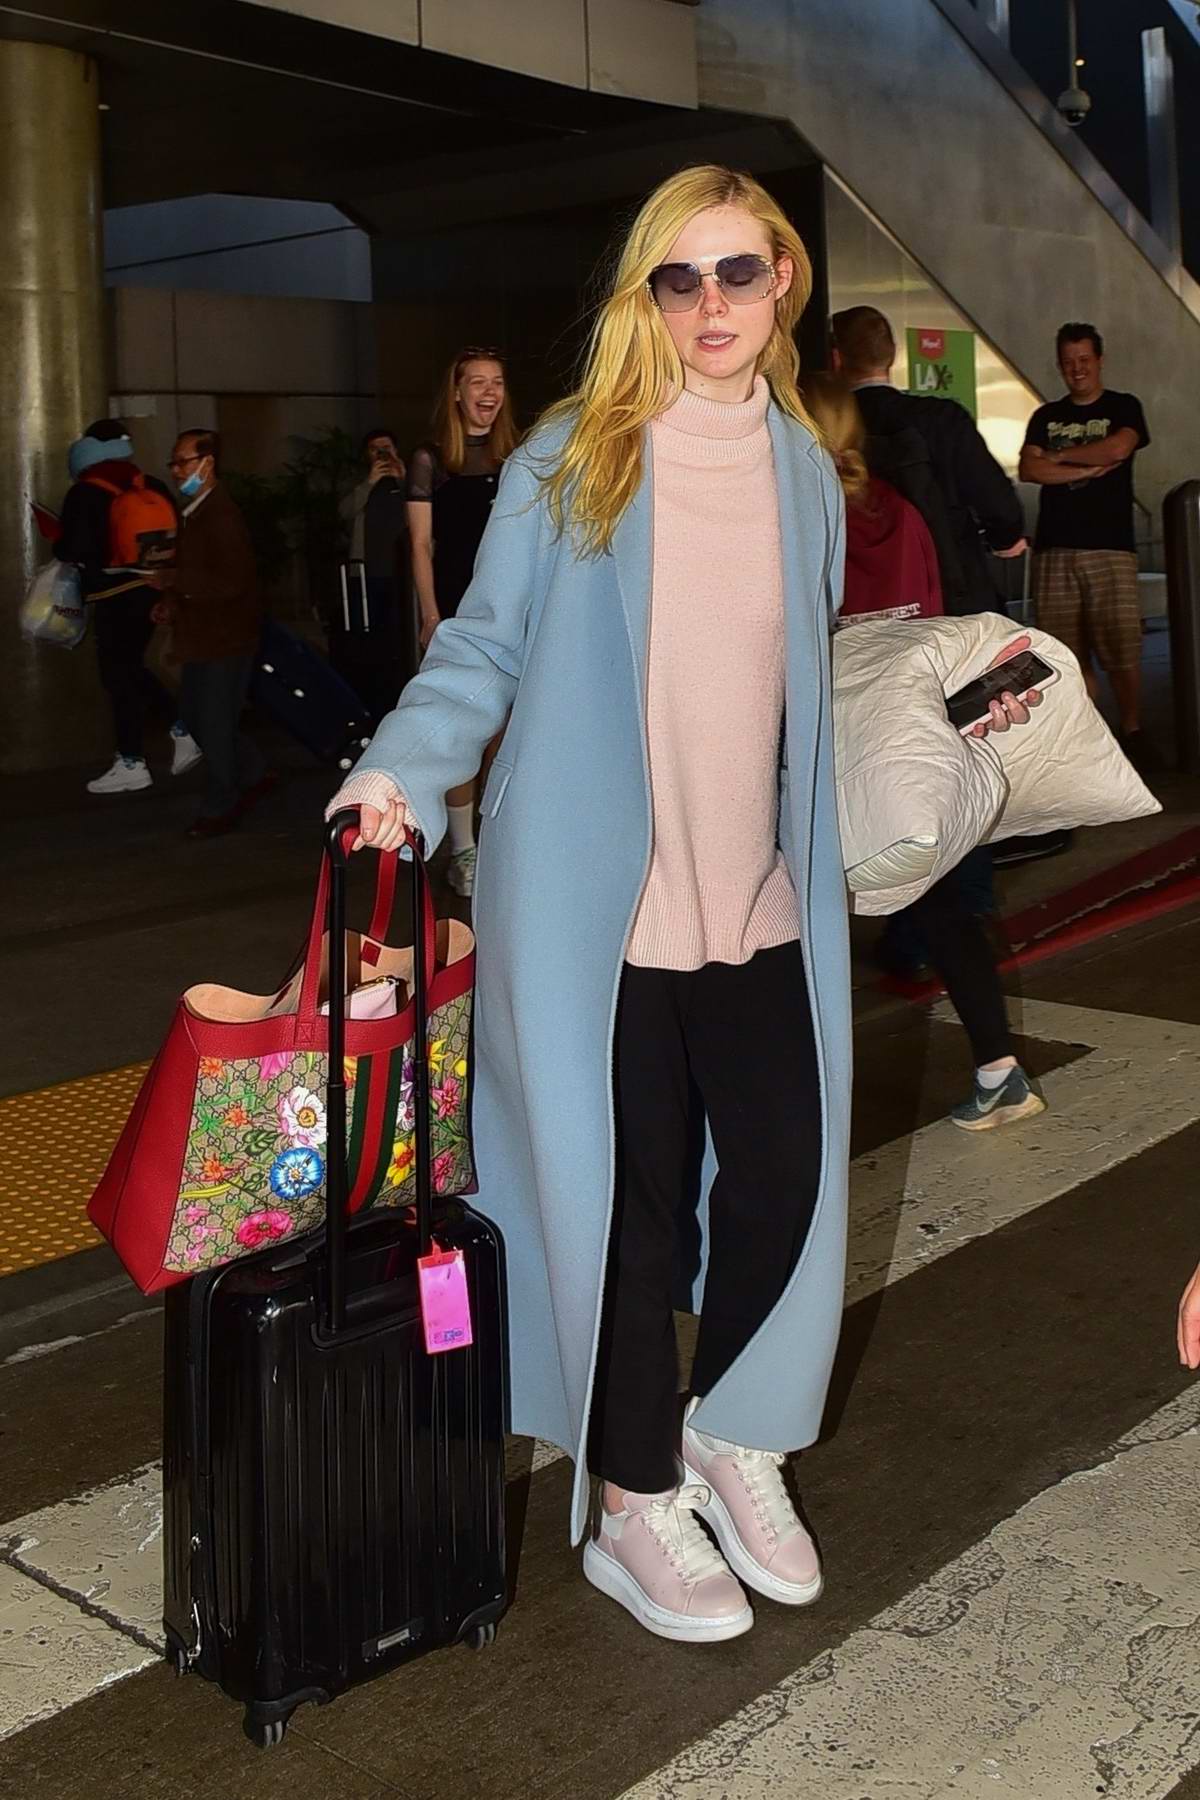 Elle Fanning carries a colorful Gucci bag as she touches down at